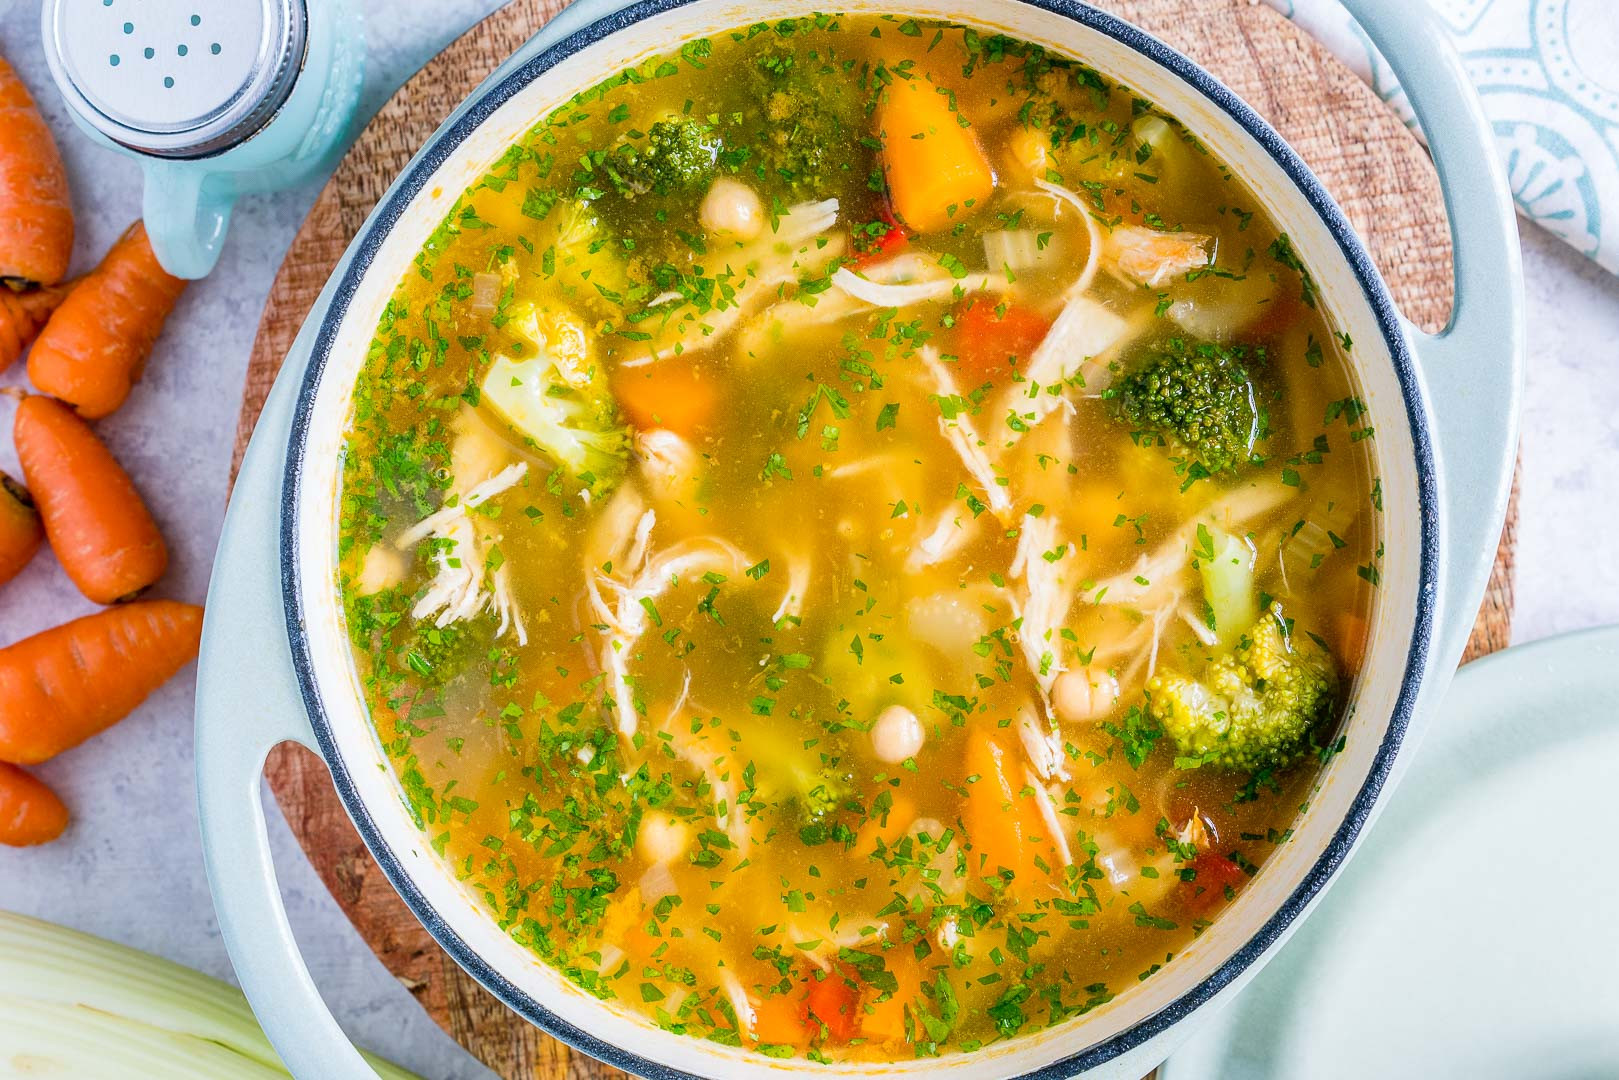 Chicken Soup Ingredients
 Eat this Detox Soup to Lower Inflammation and Shed Water